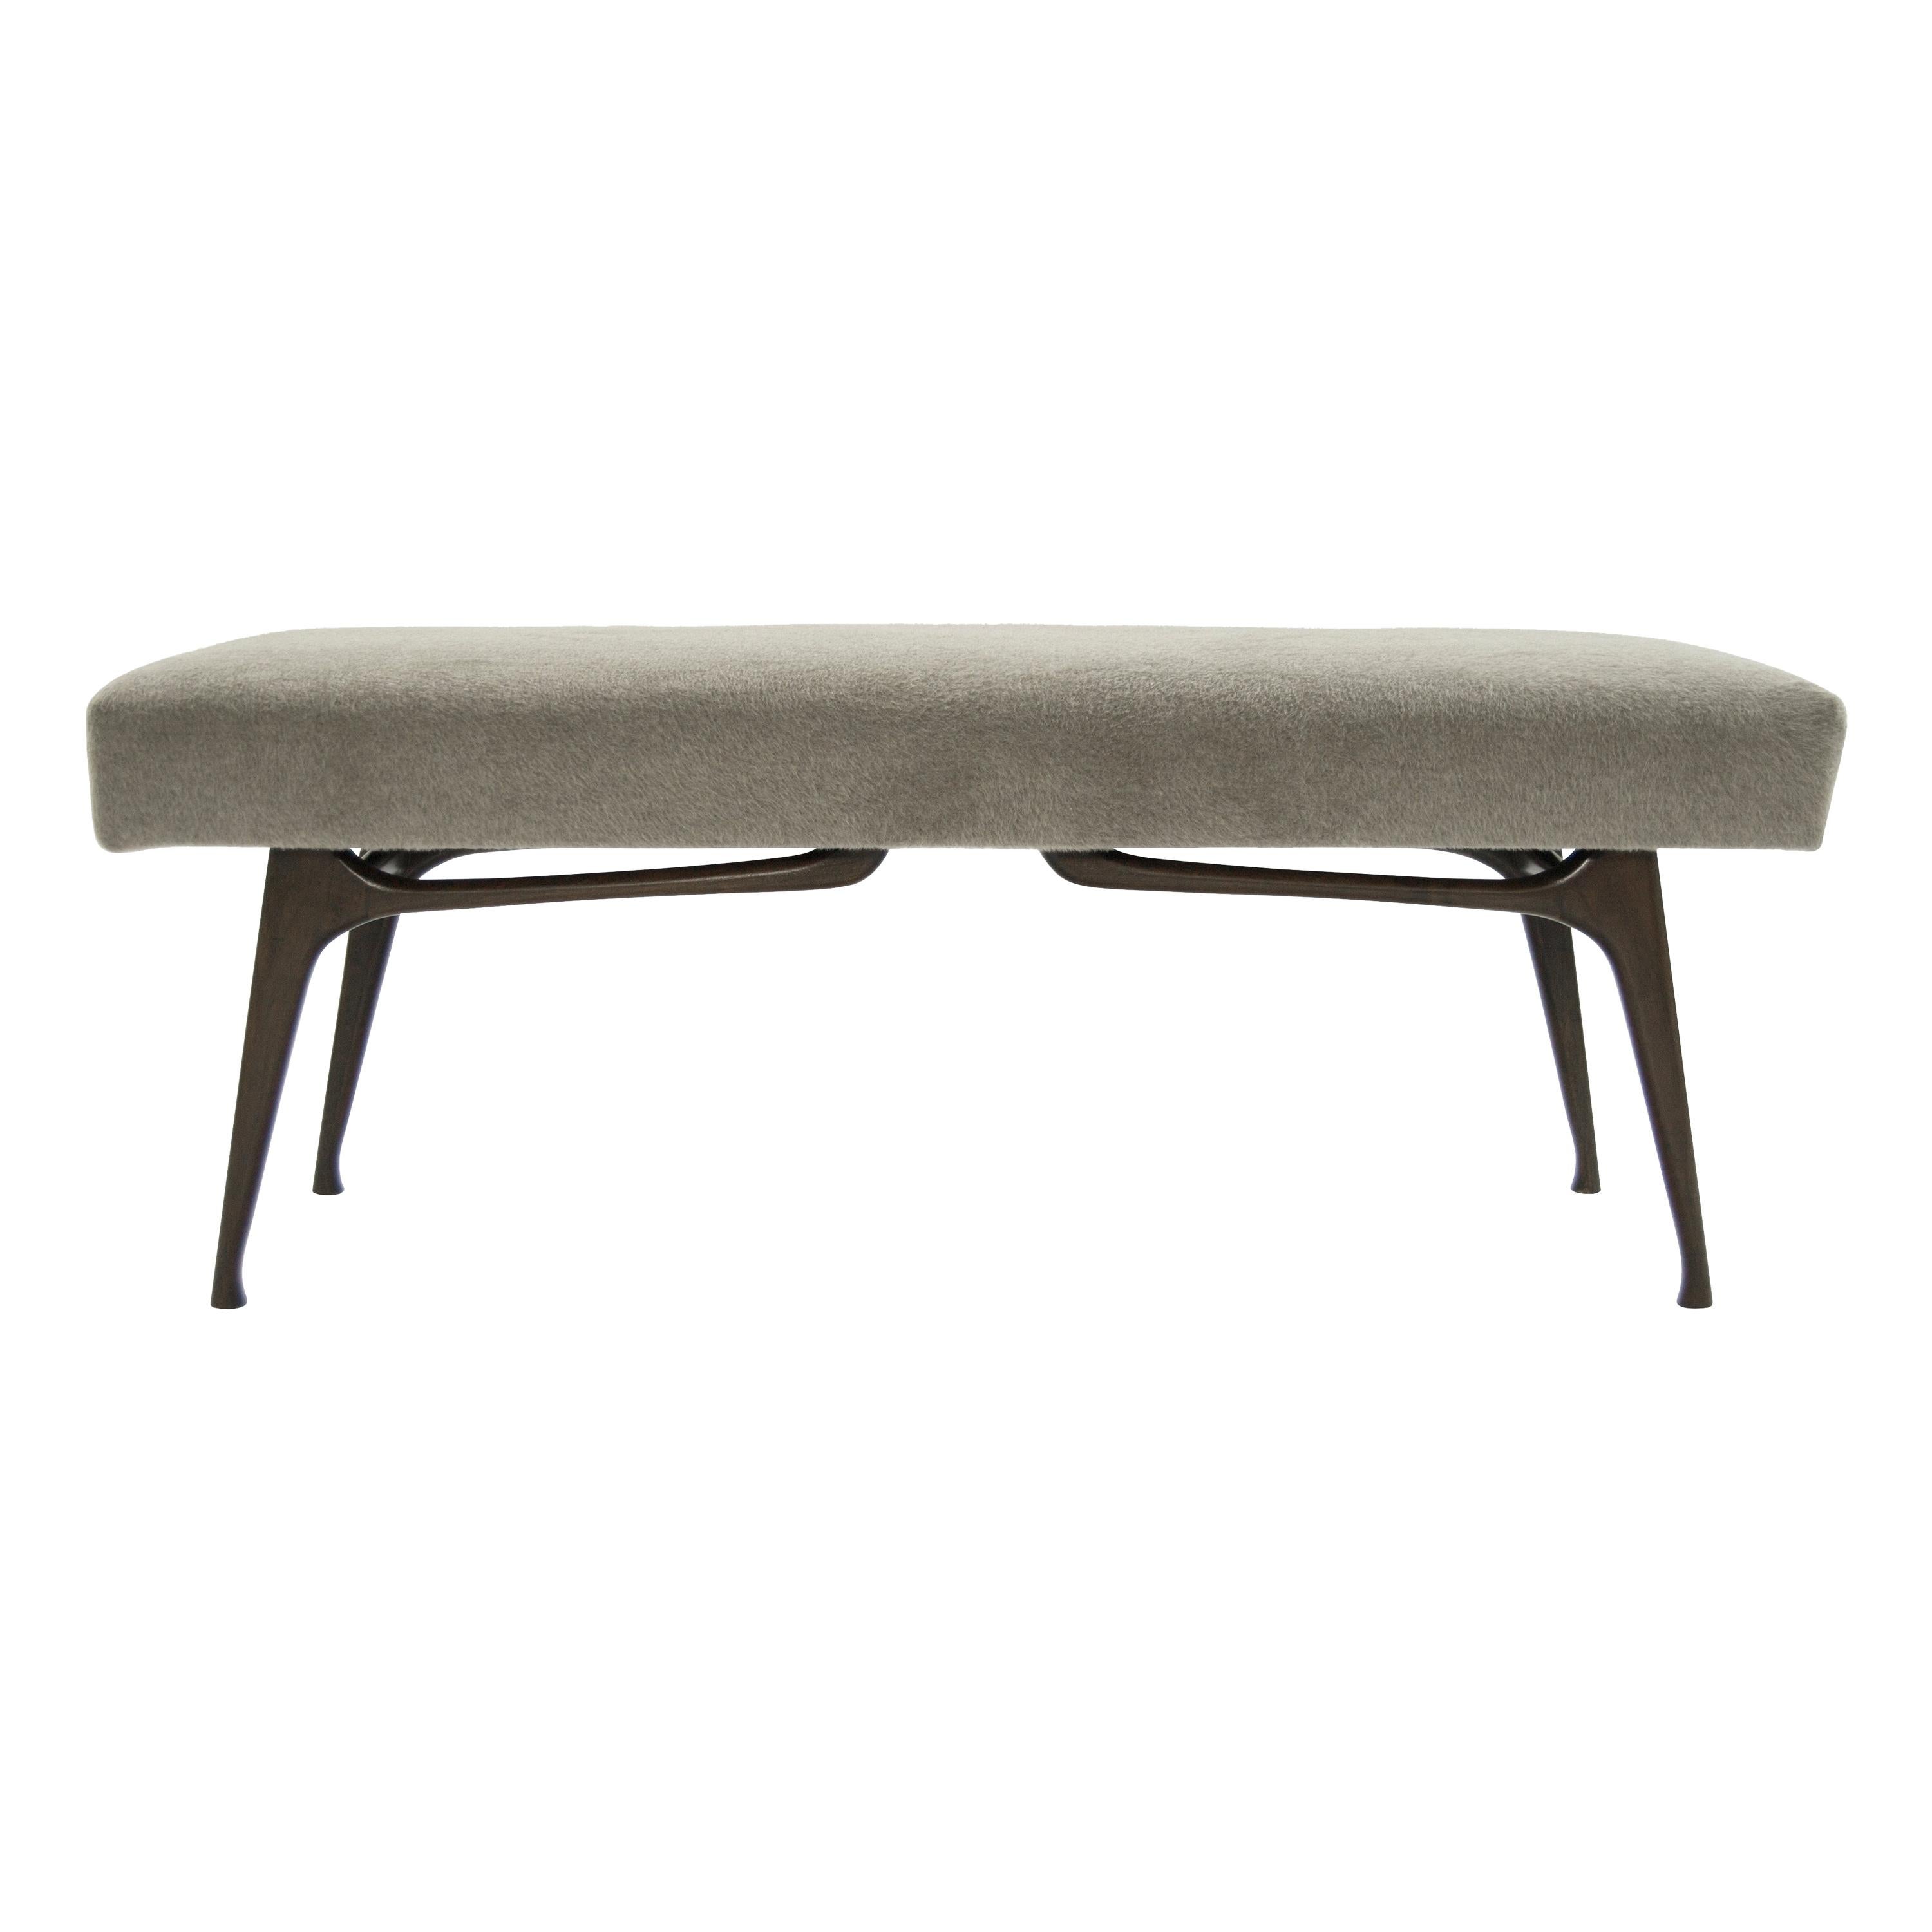 Sculptural Walnut Bench in Mohair, Italy, 1950s